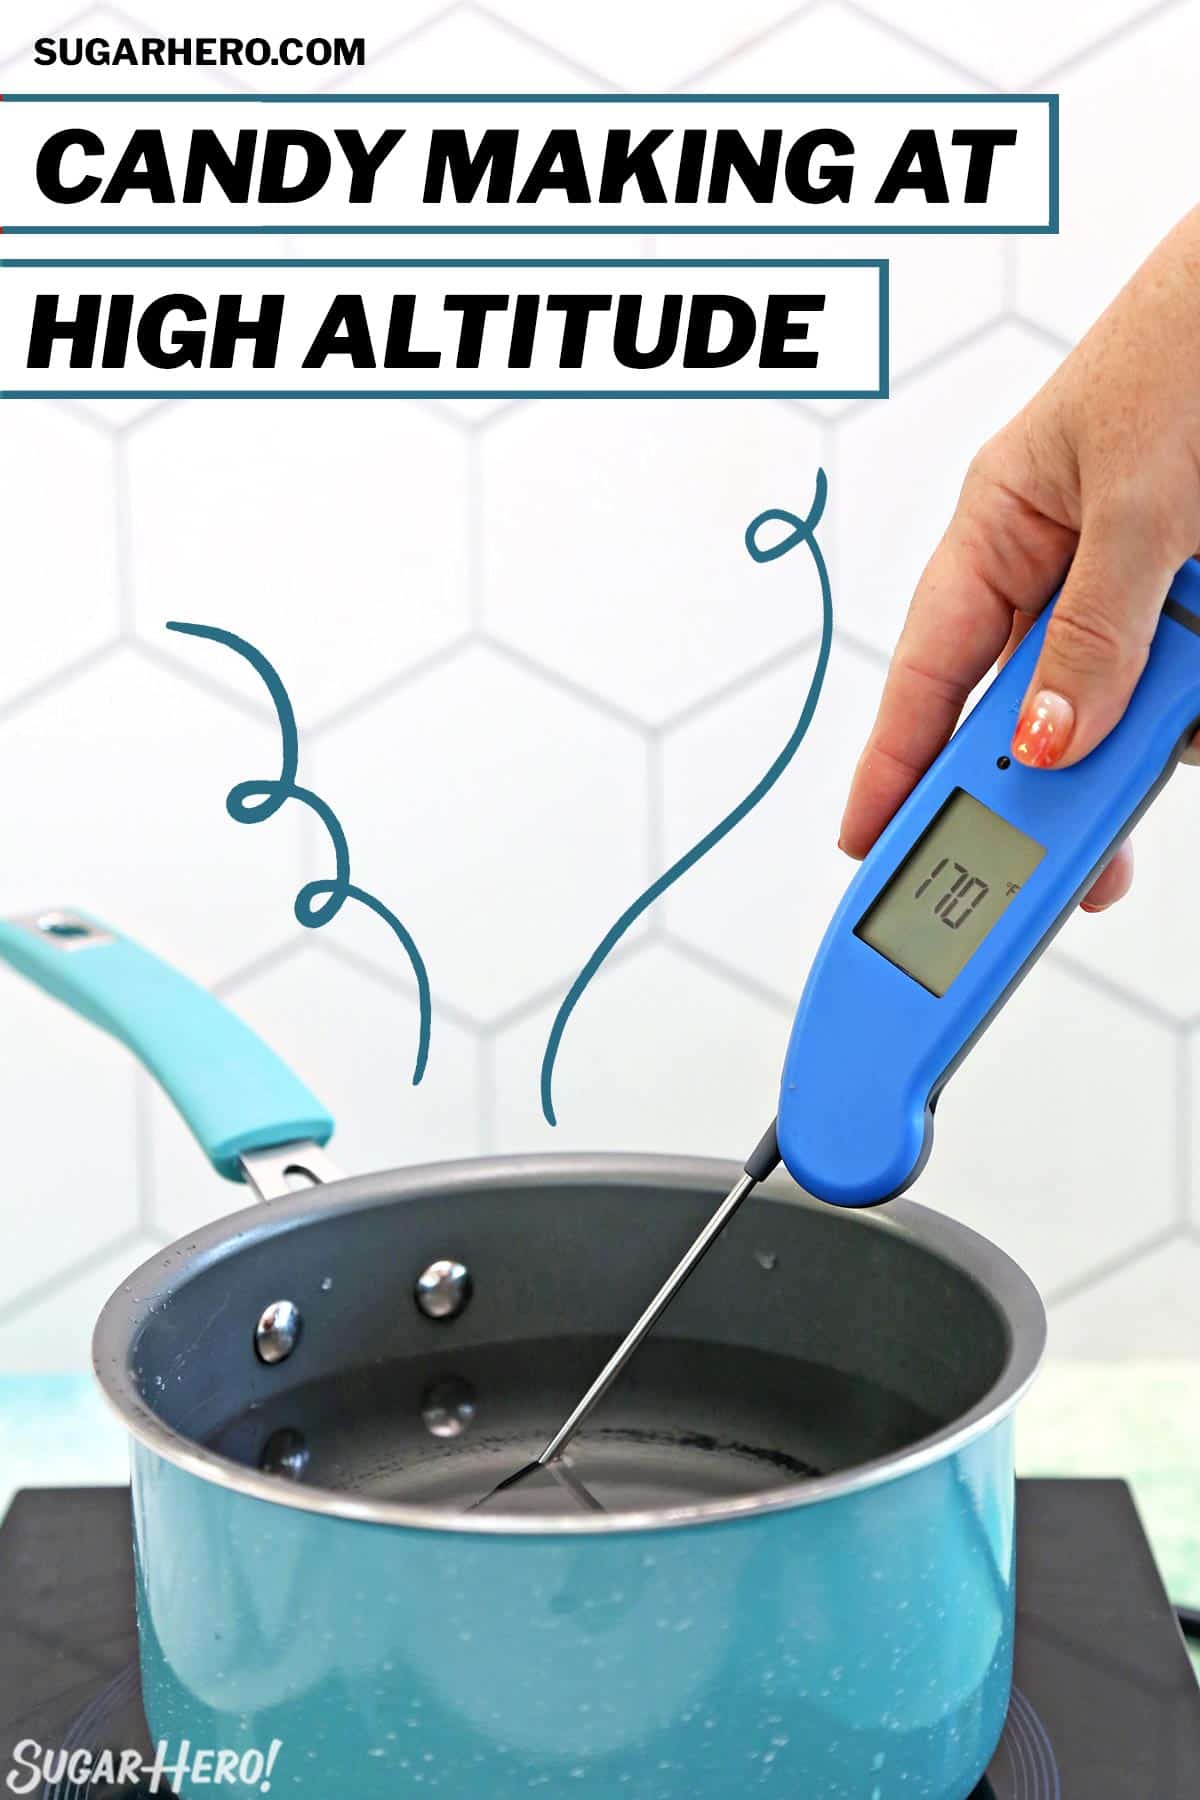 Thermometer inserted in a pot of water, with text overlay for Pinterest.